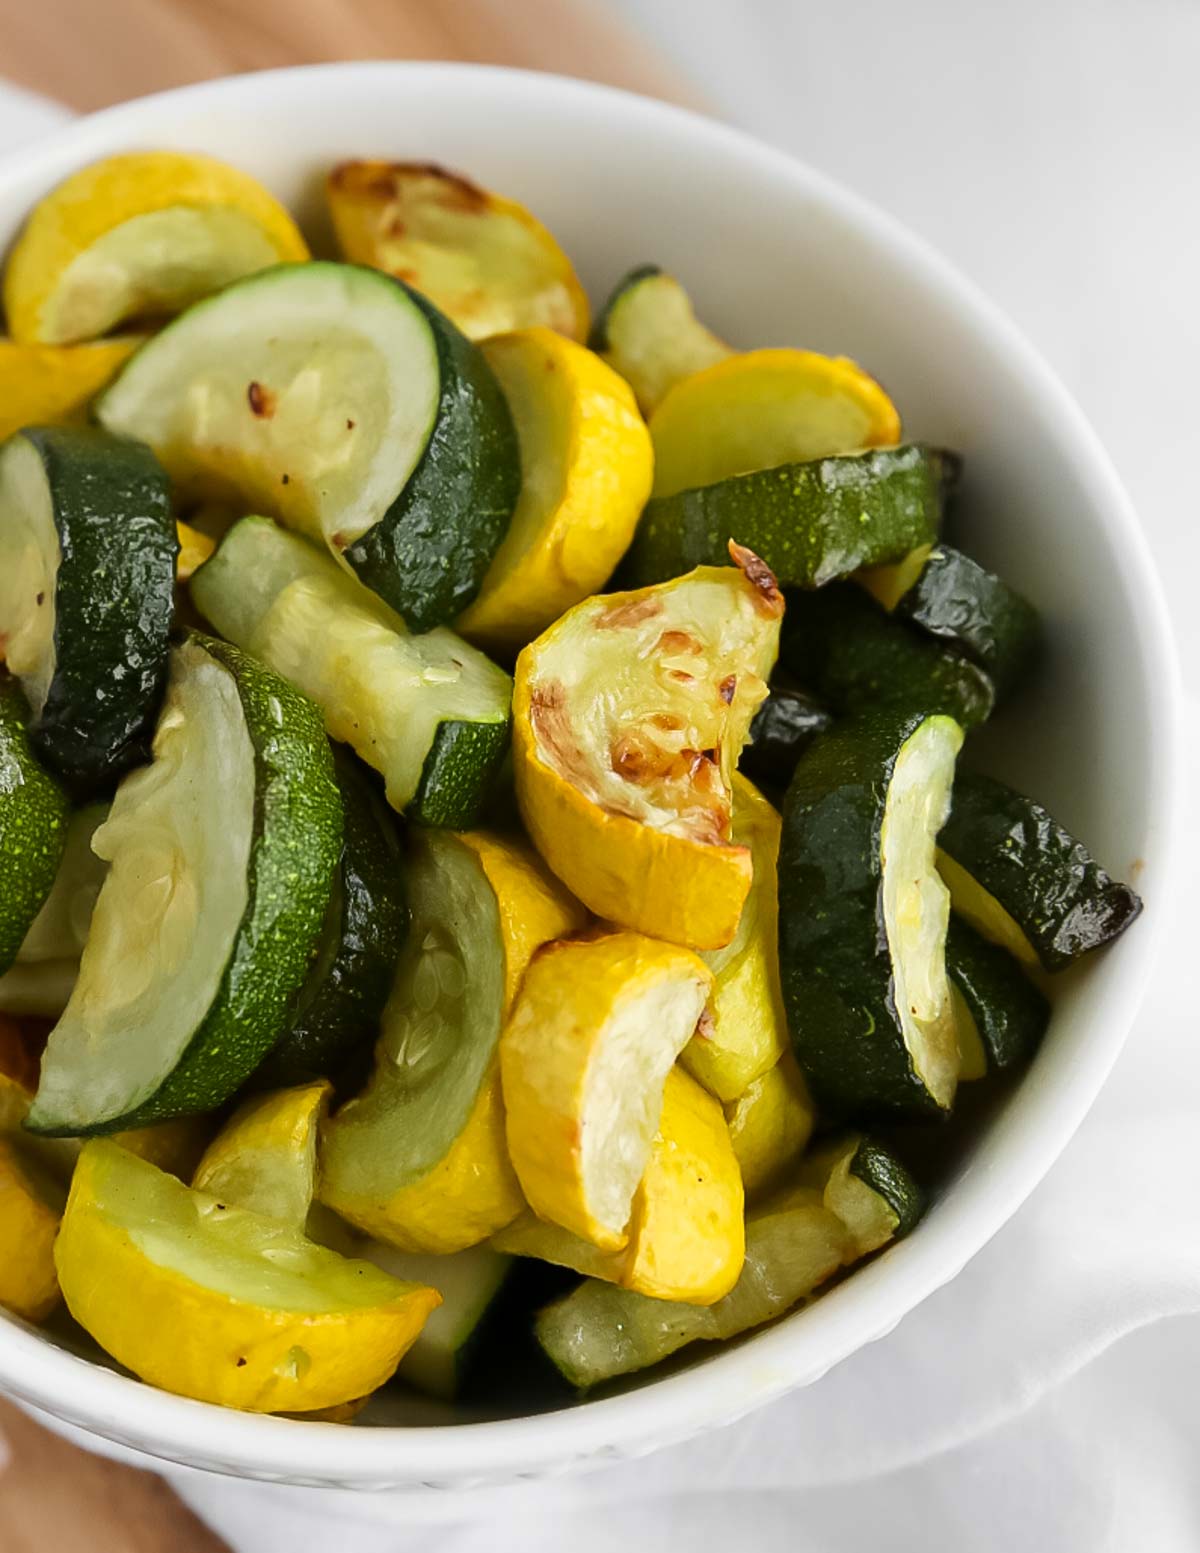 A close up image of cooked yellow squash and zucchini squash in a white bowl.